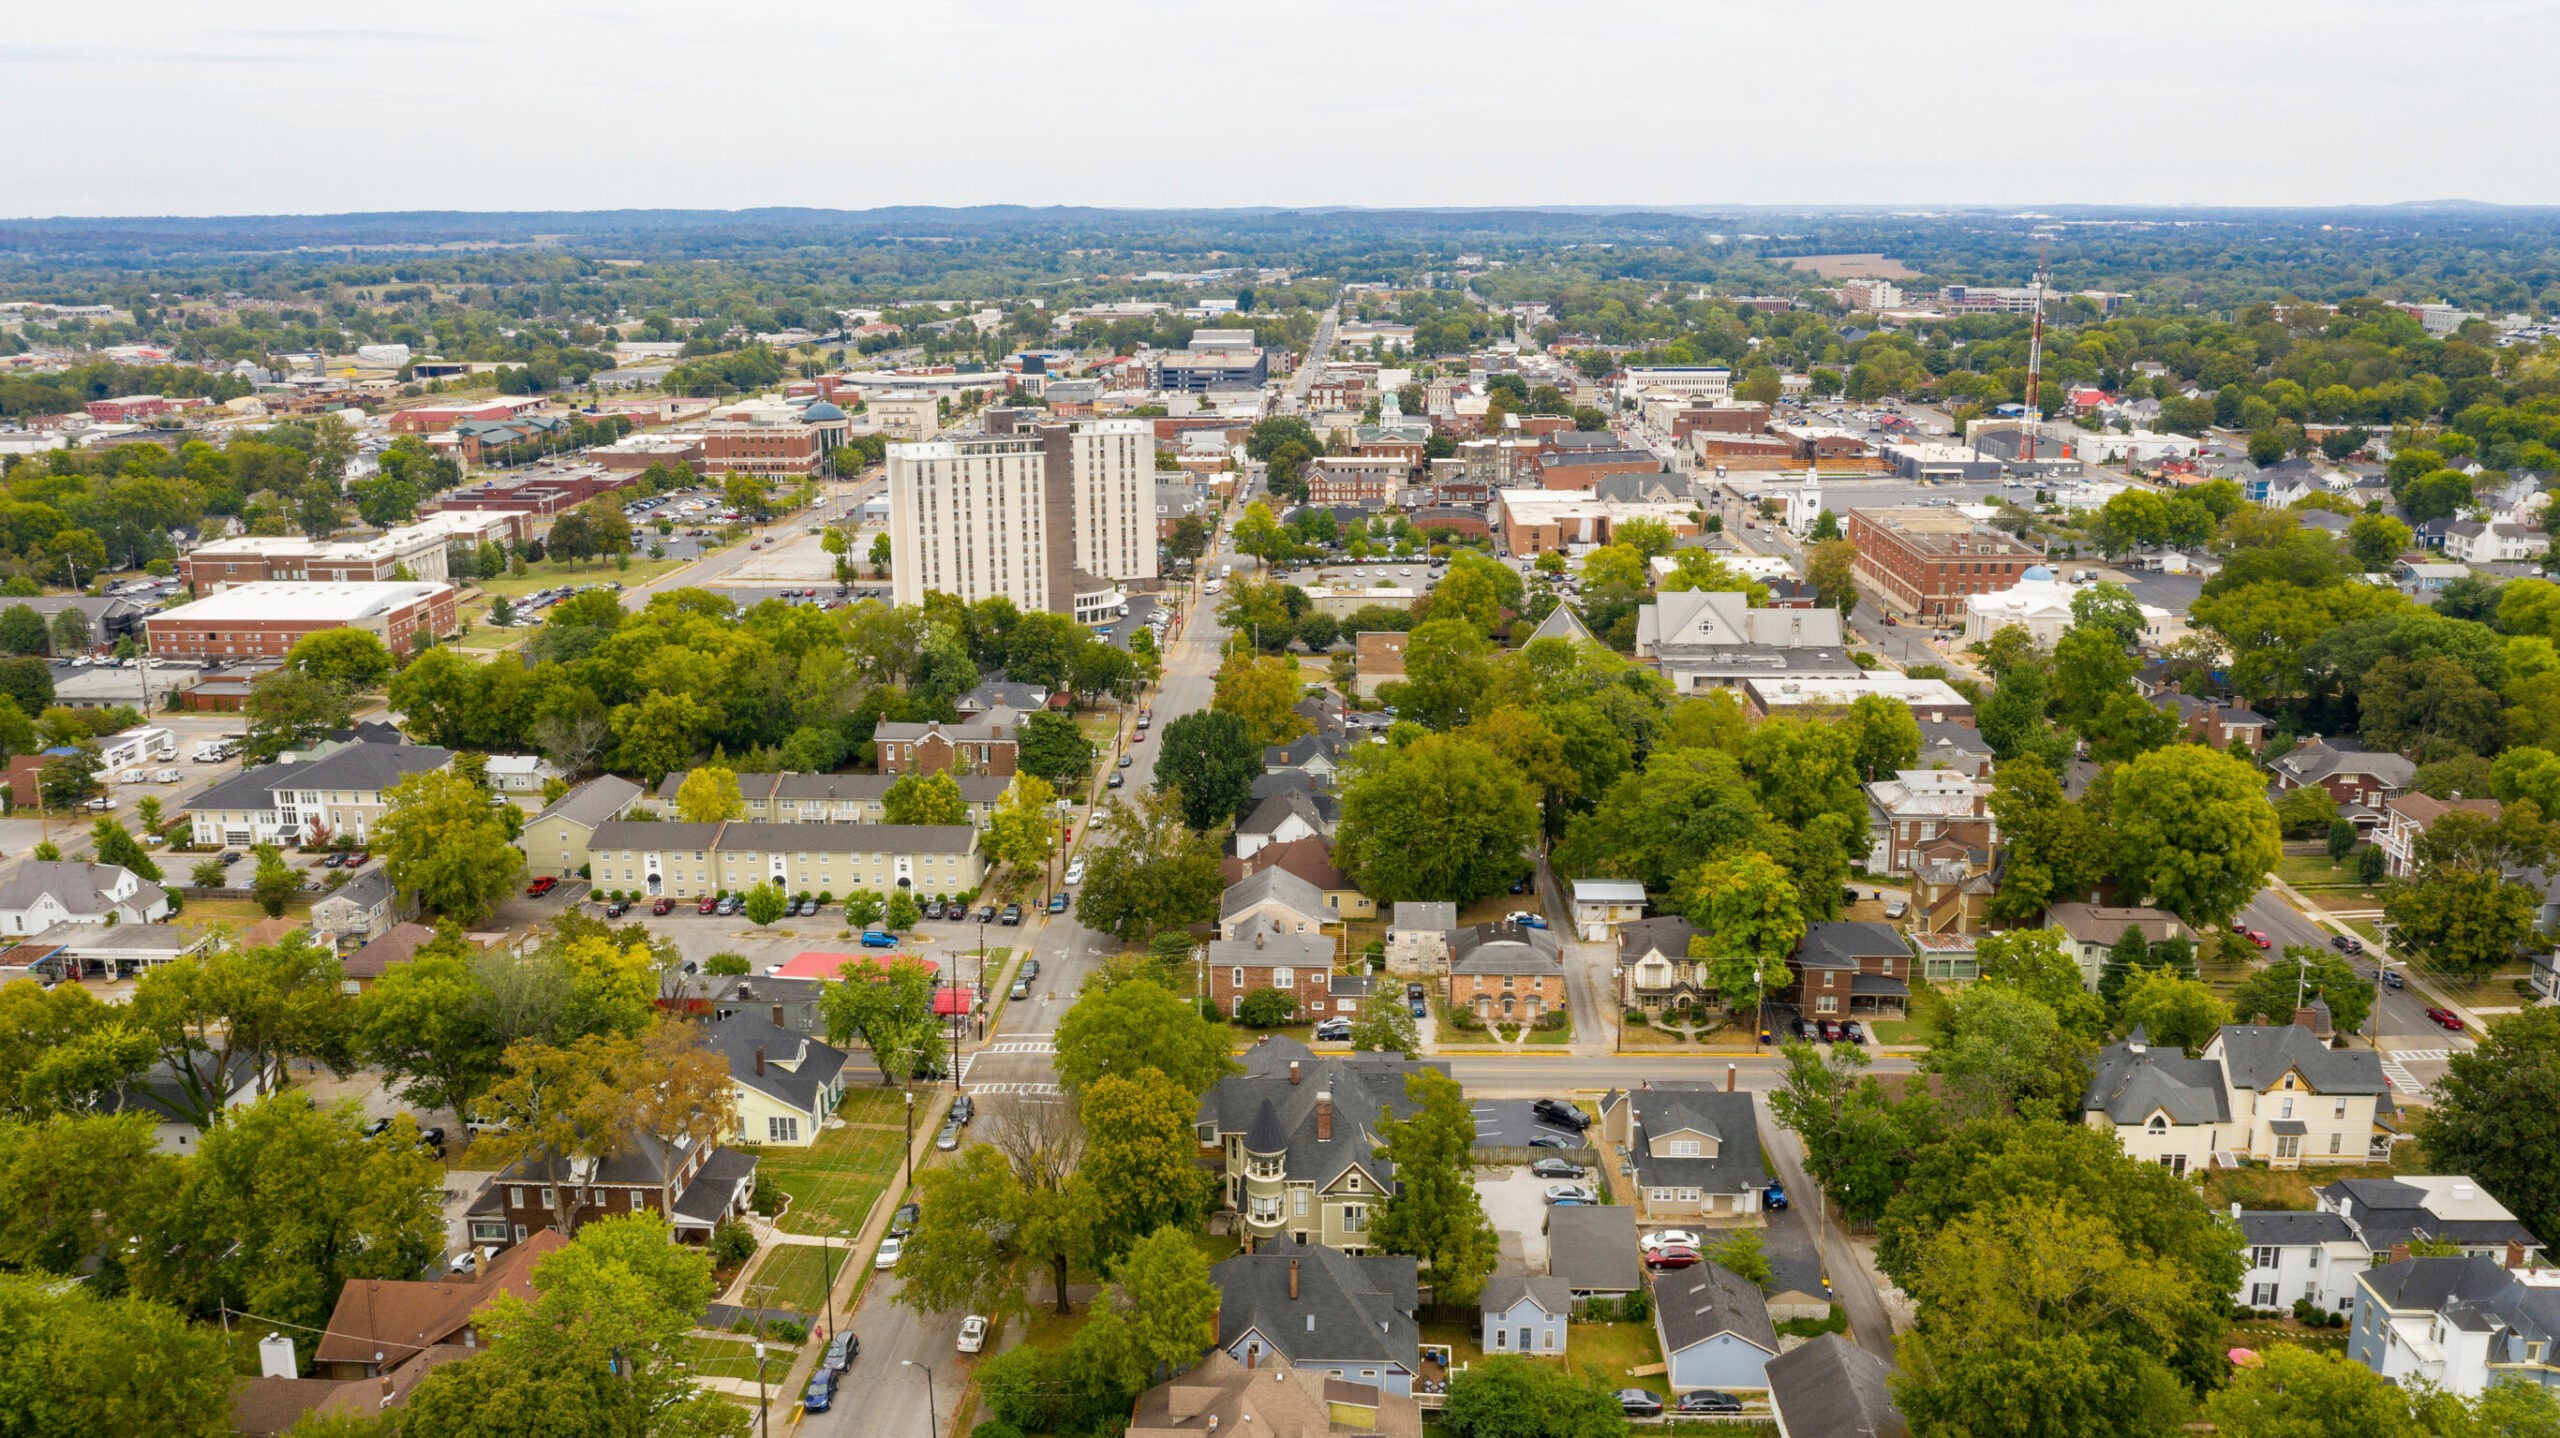 6 Interesting Facts About the Bowling Green, Kentucky Real Estate Market